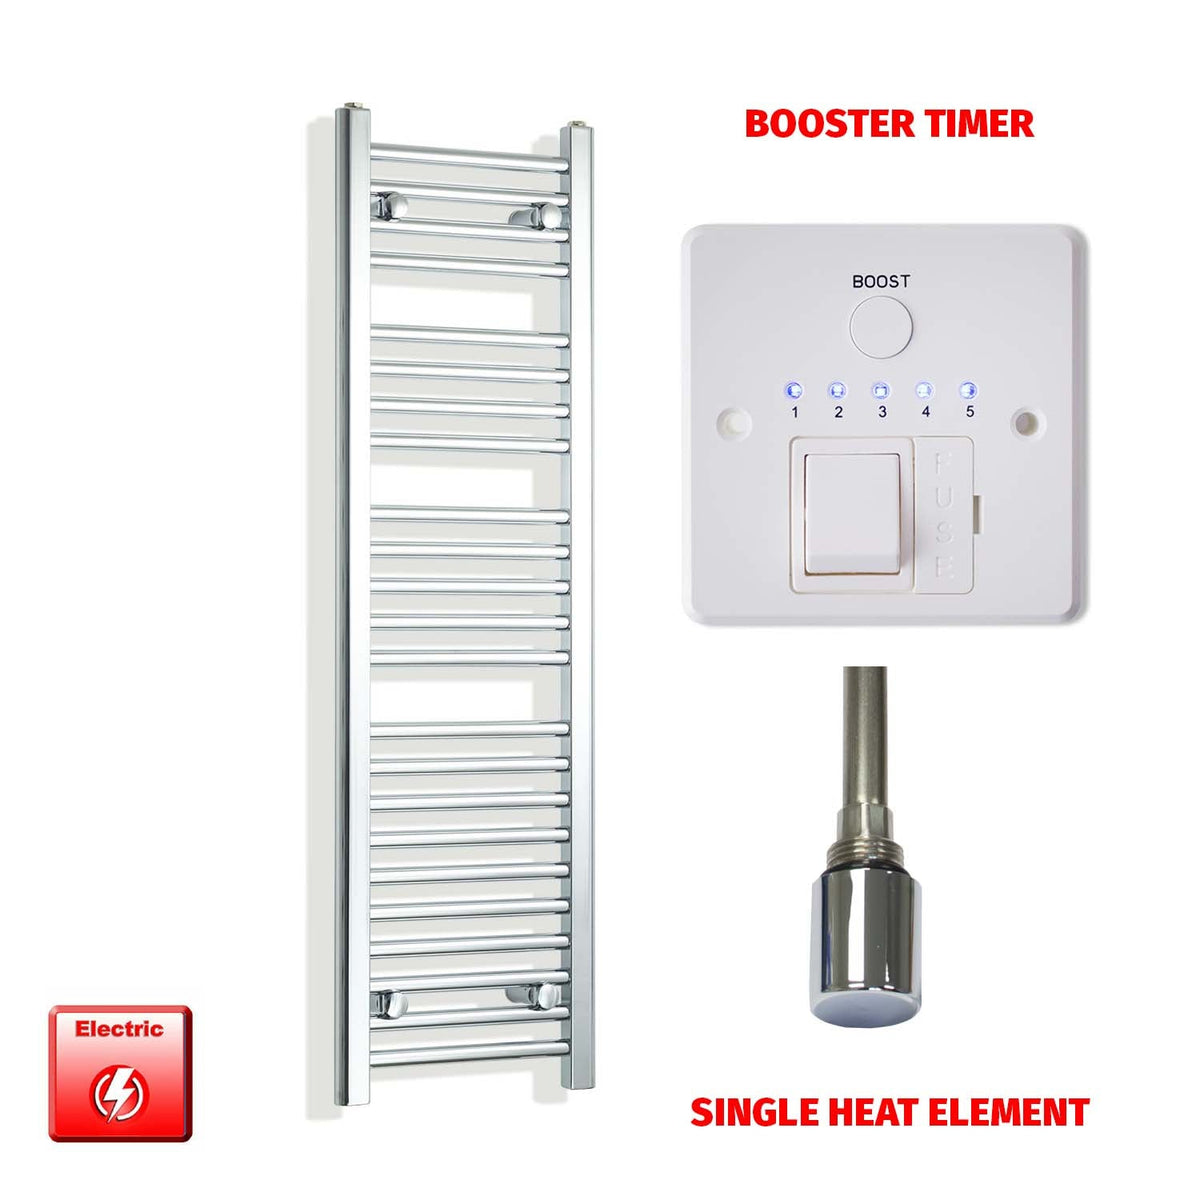 1200mm High 300mm Wide Pre-Filled Electric Heated Towel Rail Radiator Straight Chrome Single Heat Element Booster Timer